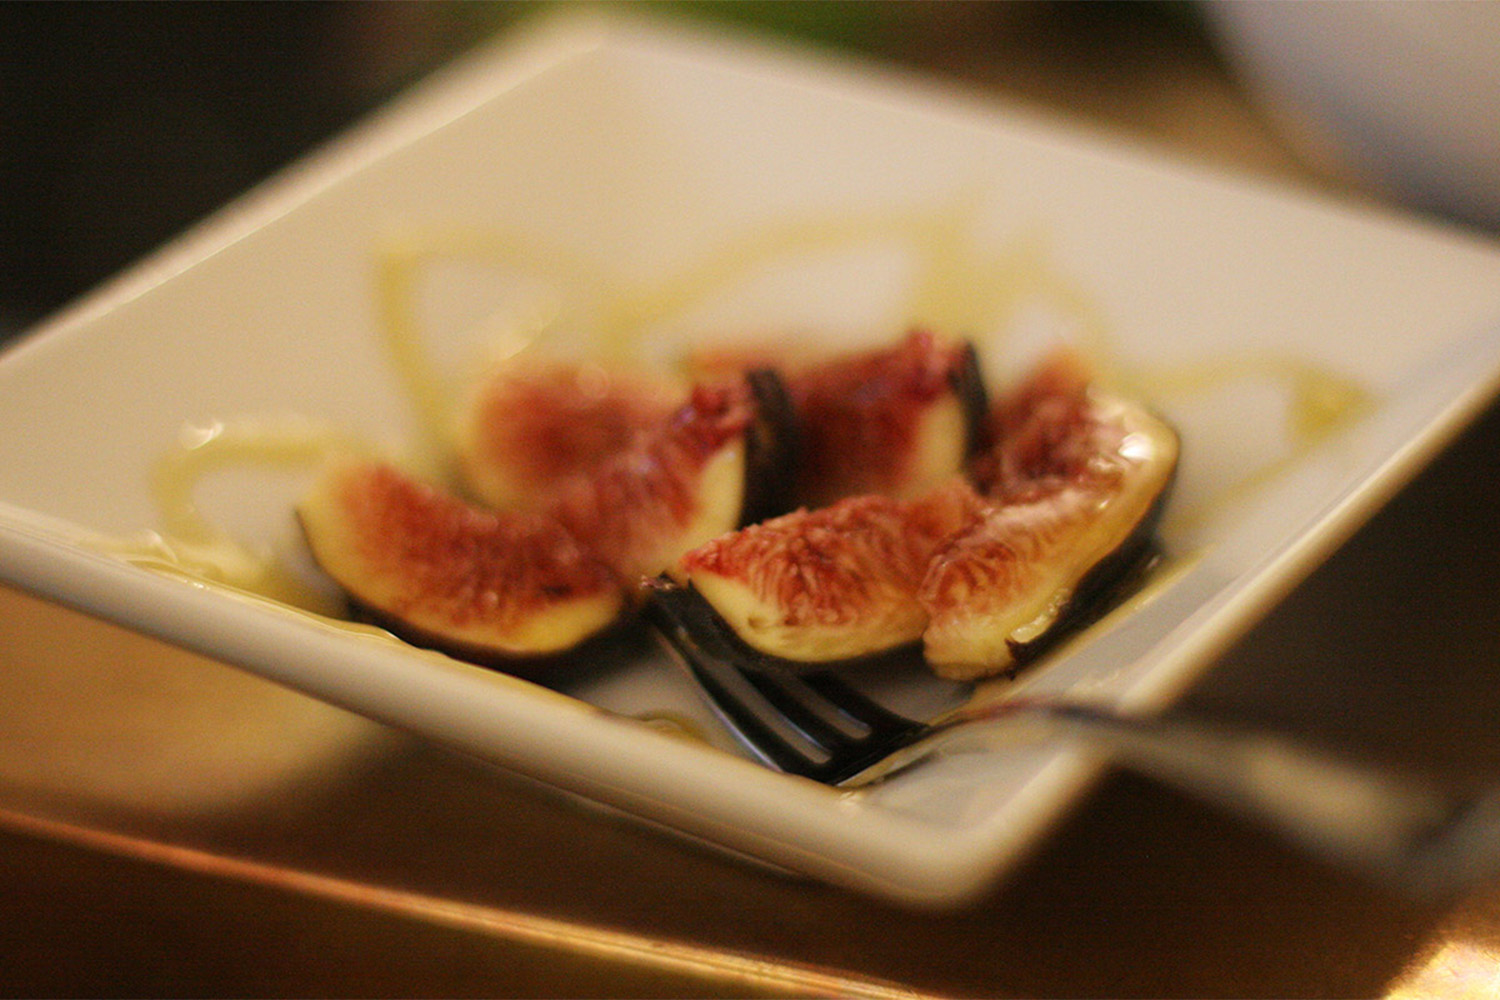 Figs fresh from the tree, drizzled with honey.